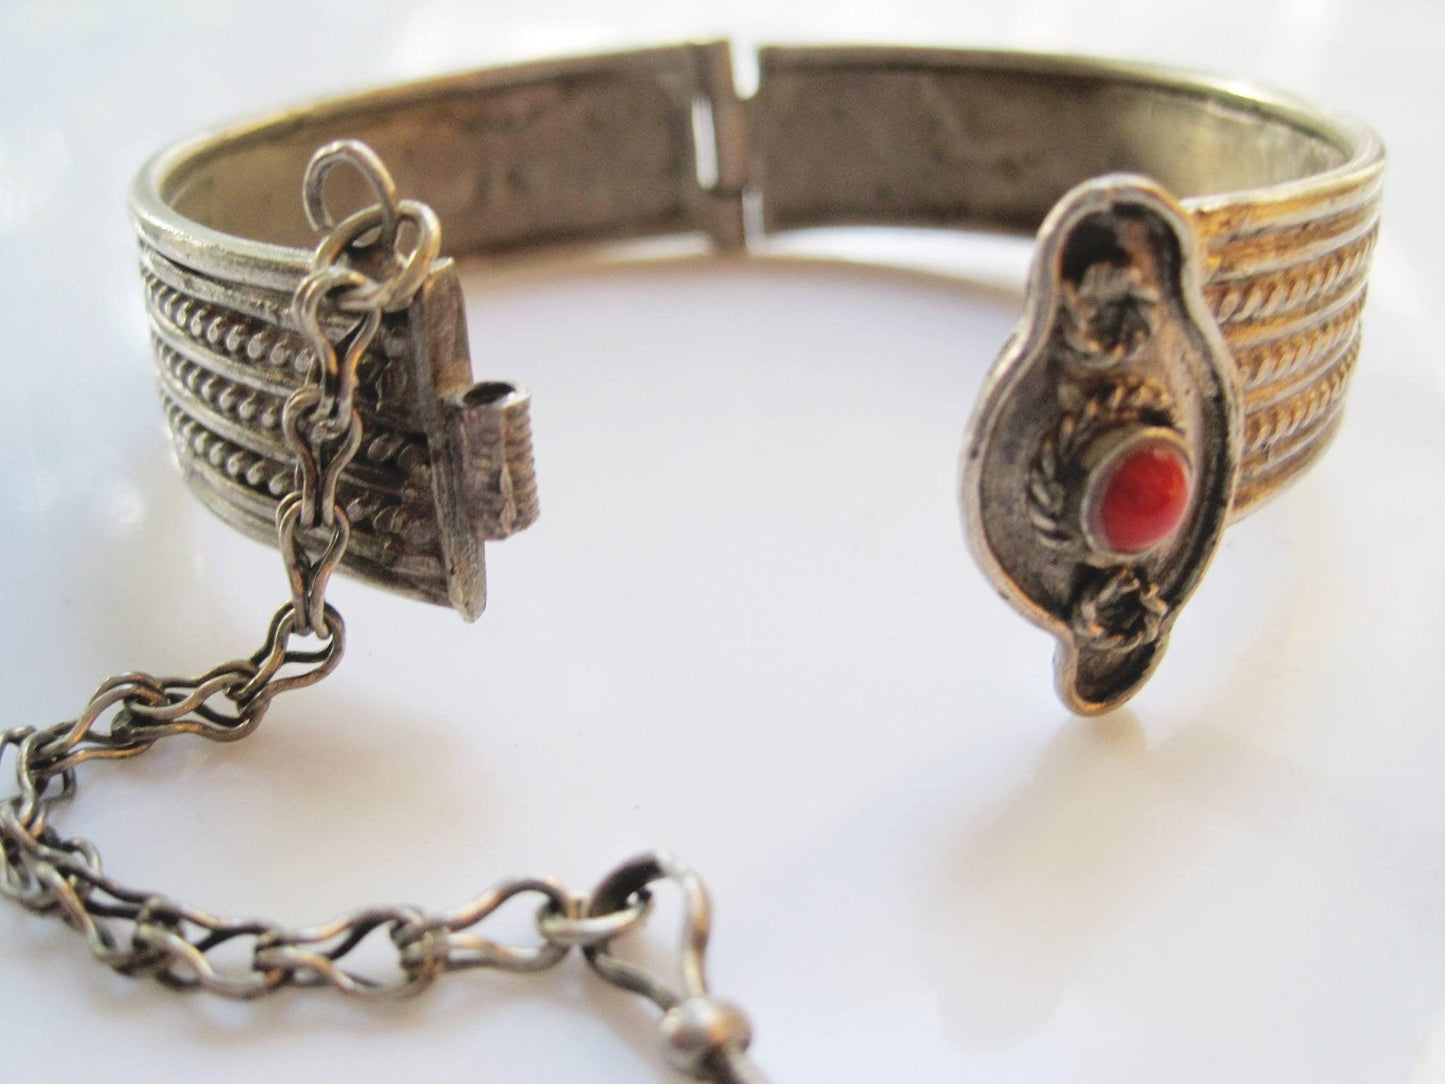 Antique Ottoman Hinged Bangle Bracelet with a Small Red Cabochon - Anteeka